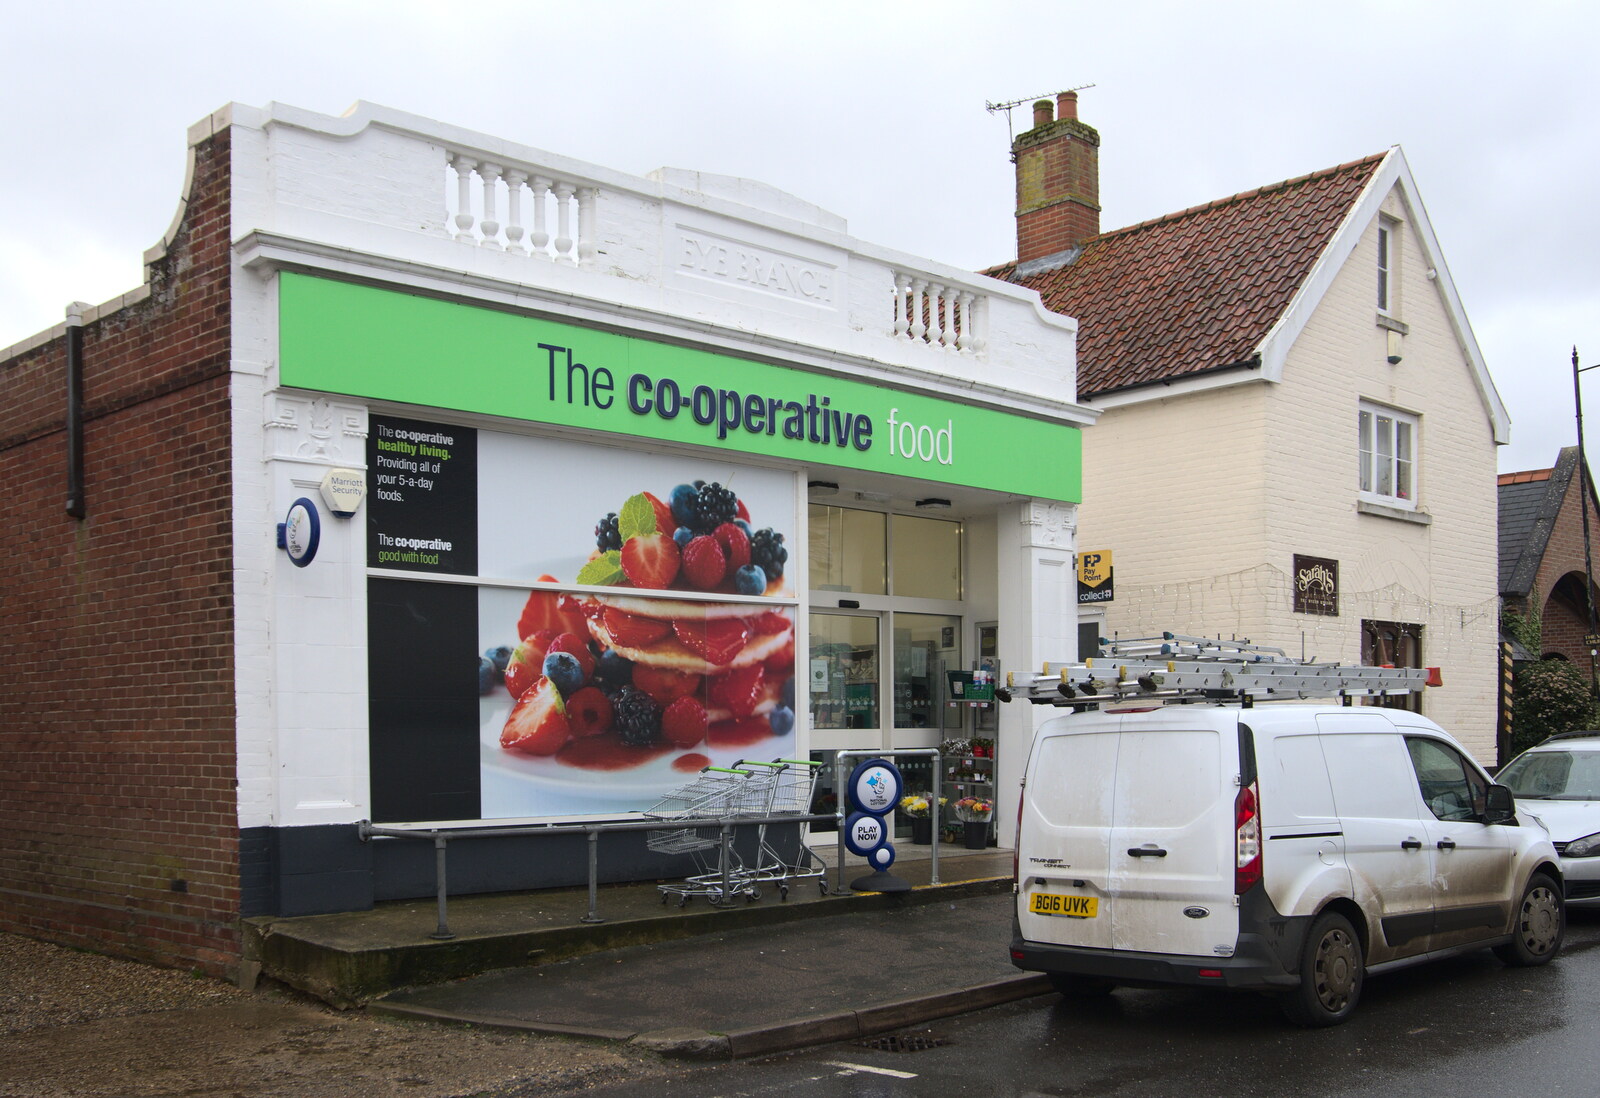 The Eye Branch of the Co-operative Food from New Year's Day, Brome, Suffolk - 1st January 2022